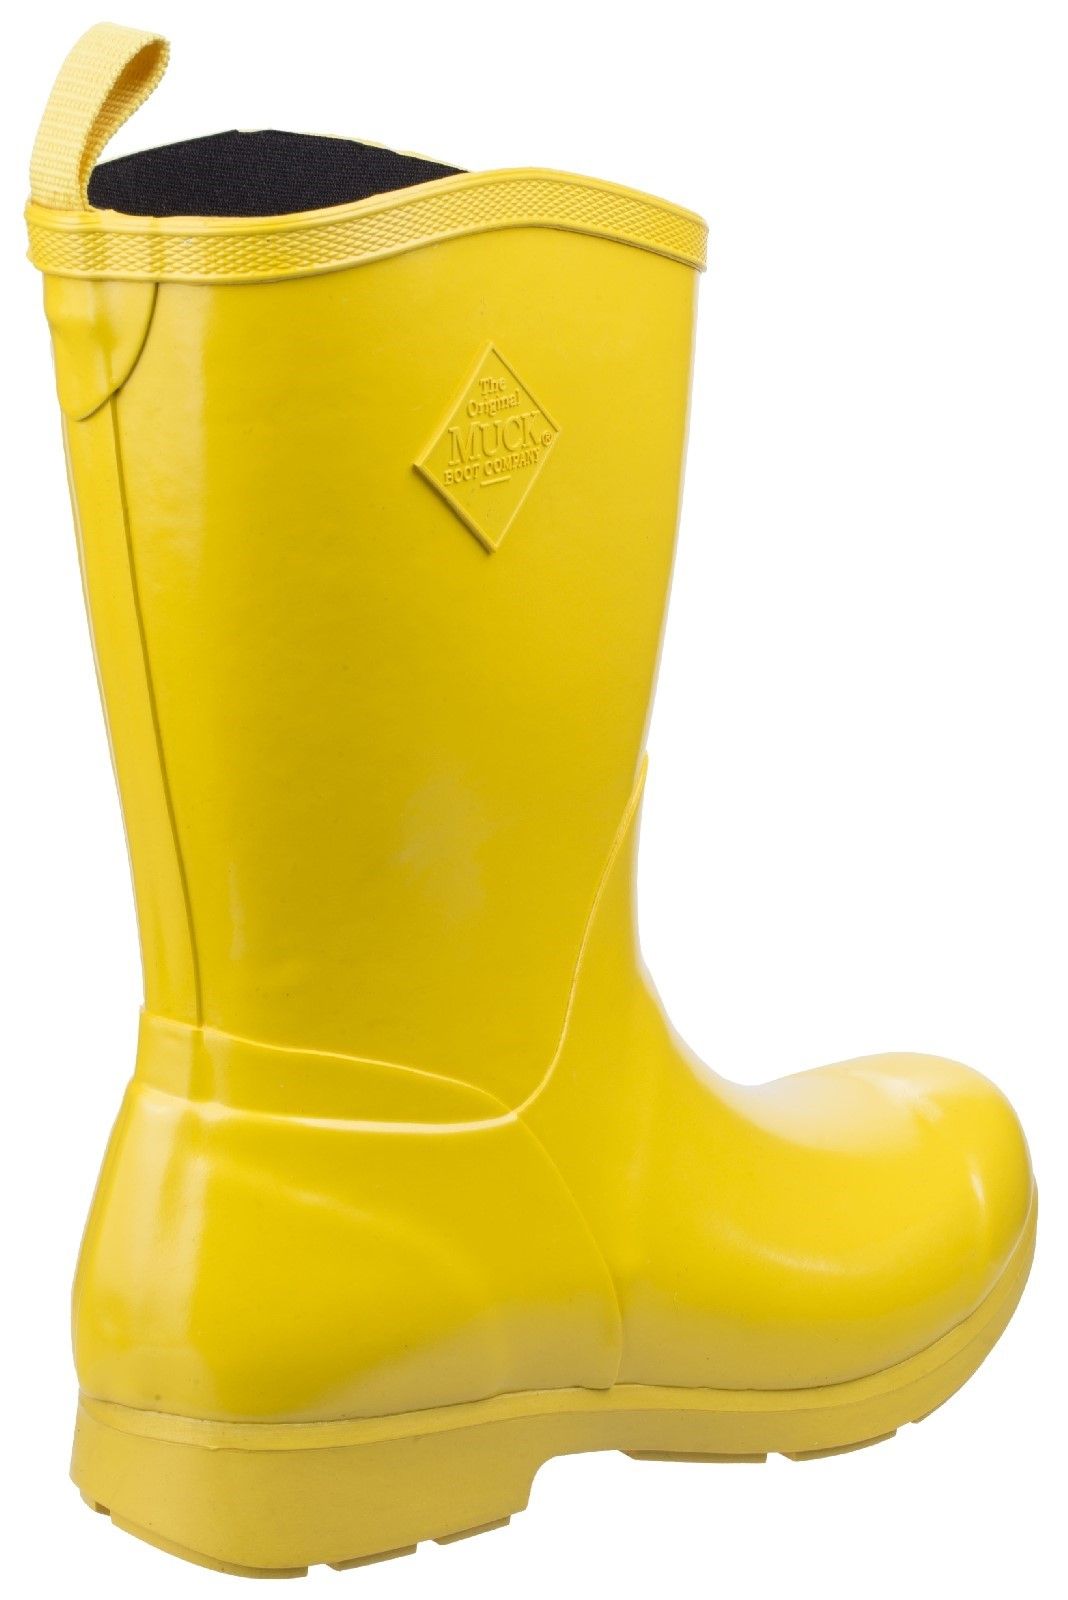 Style meets function in our light weight rain boot collection. These boots will keep you dry on wet rainy days while the 6mm neoprene Footbed will keep your feet happy all day long.100% Waterproof. 
6mm Neoprene Footbed. 
Glossy Finish. 
Friction Construction / Canvas Lining. 
SRA Slip-Resistant.